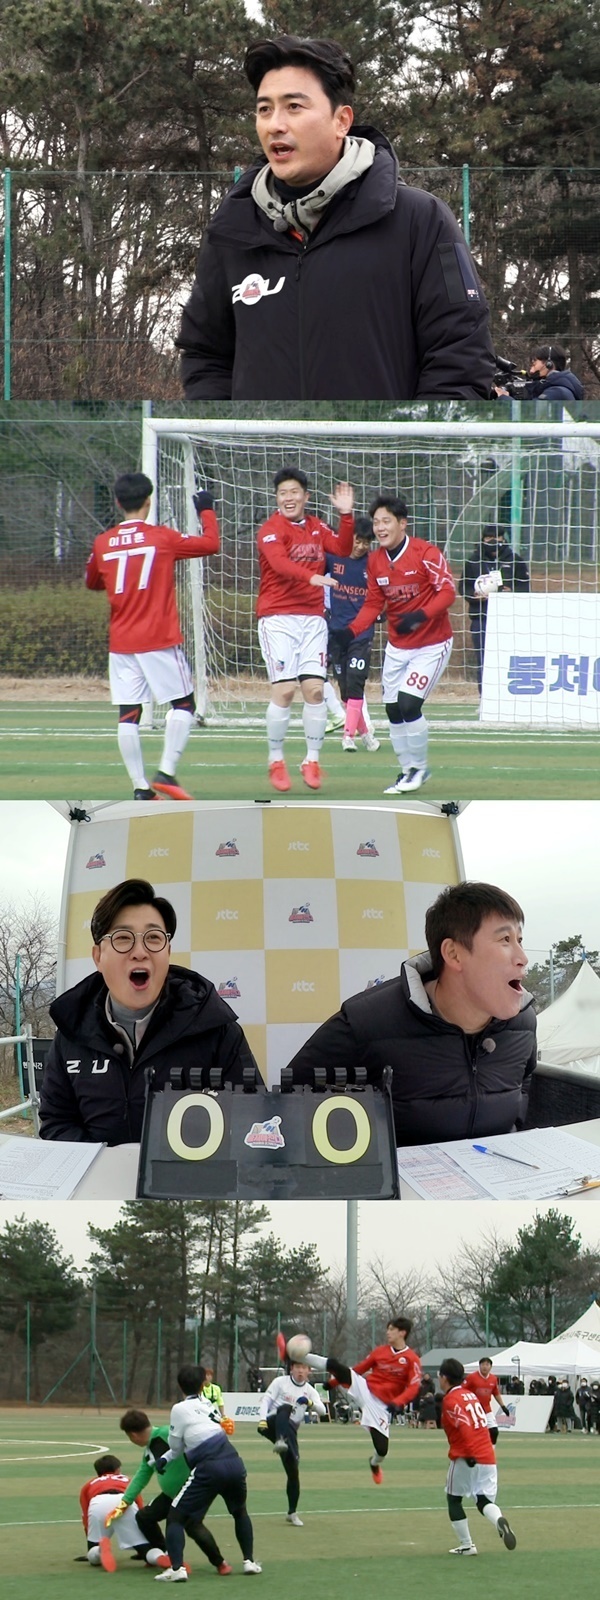 What happened to FC striker Kim Byung-hyun hits his life goal with his ability to climb.At JTBCs We Must Stick Together, which will be broadcast on January 10, the spectacular shooting performance of legends during the preliminary round of JTBCs We Must Stick Together will catch the attention of the first-round audience.On this day, What happened FC will play the second qualifying match with Konjiam Mansun FC to advance to the quarter-finals.In the meantime, UNIQ Kim Kim Byung-hyun and all-ace Lee Dae-hoon show off their impressive shooting sense and dynamic gestures and raise the heat of the scene.First, striker Kim Byung-hyun makes his heart hot with his previous life goal after signing FC.In particular, Ahn Jung-hwans limited-edition mercenary technique and Kim Byung-hyuns soccer sense are synergistic, and he takes a chance to counterattack quickly and shoots a cannon shot.This life goal, which was achieved only by the chemistry of coach Ahn Jung-hwan and Kim Byung-hyun in an unexpected situation, is a back door that the cheers were not constant on the scene as it was fresh as Kim Byung-hyuns nickname UNIQ Kim.Lee Dae-hoon, meanwhile, creates a wonderful shooting scene with an air kick.Ko Jeong-un, commentator on the Lee Dae-hoon ticket Caesars kick, who can only be ranked No. 1 in the Taekwondo world rankings, praised Lee Dae-hoon as a superstar.